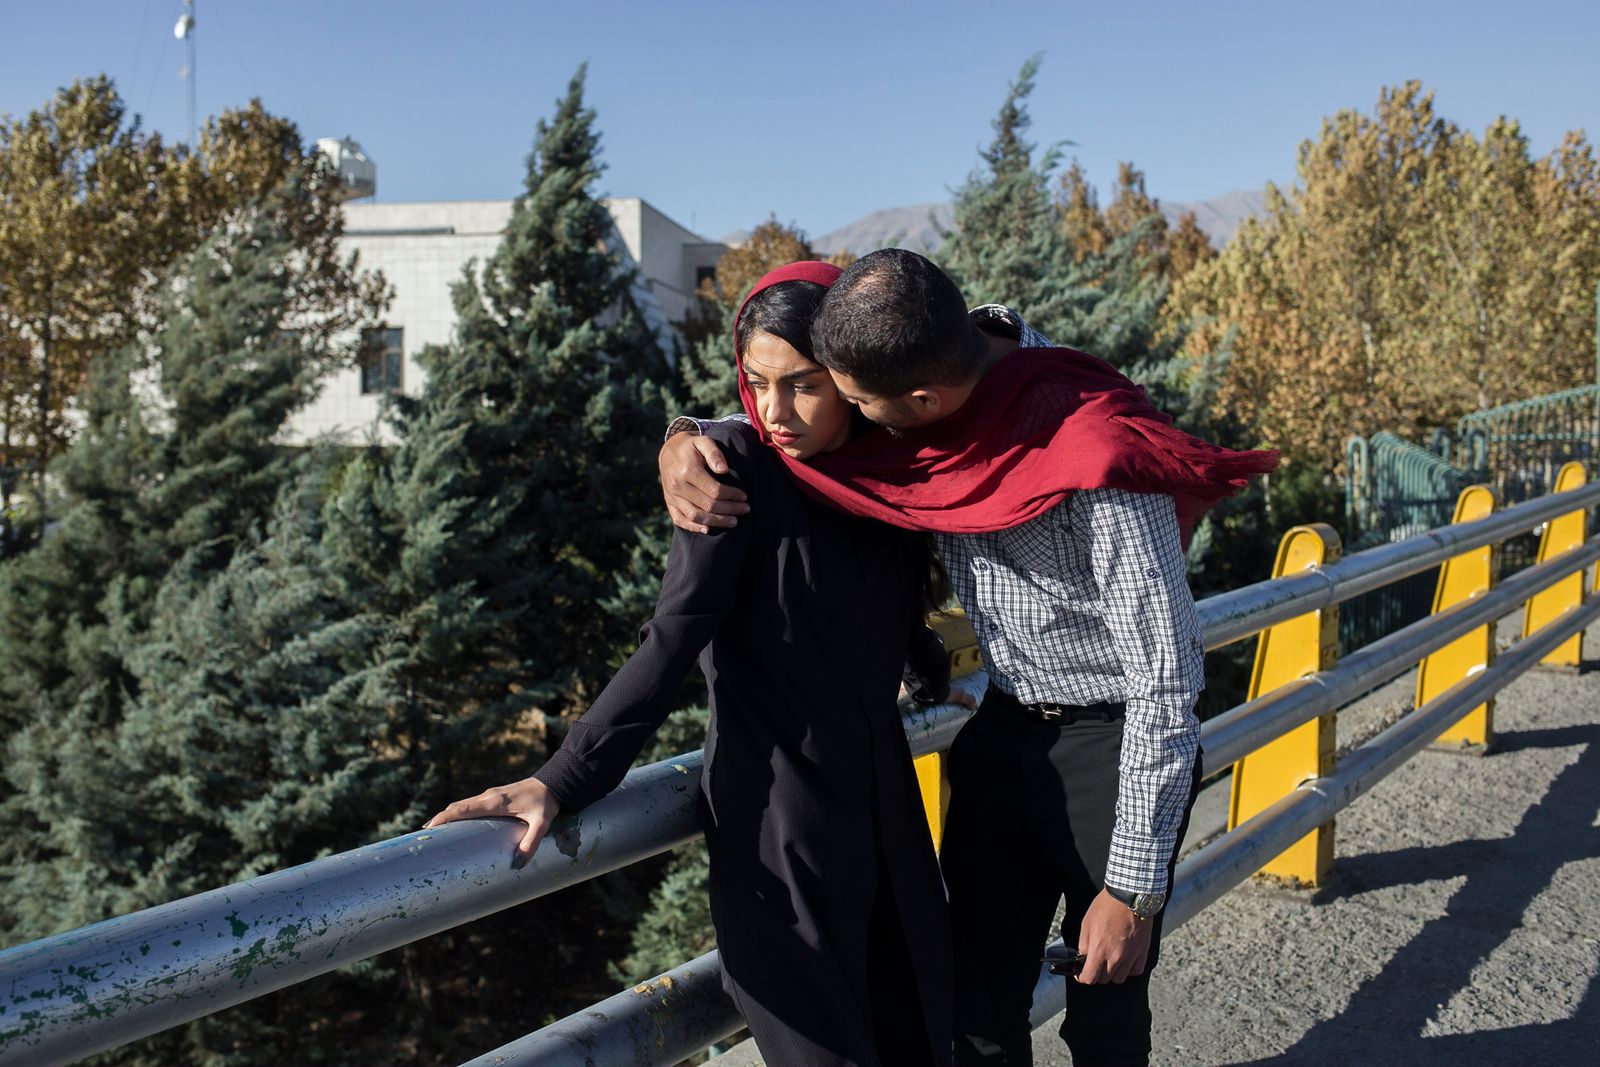 © Parisa Azadi - OCTOBER 13, 2017 - Negar and her friend Hussain embrace each other on the streets of Tehran, Iran.